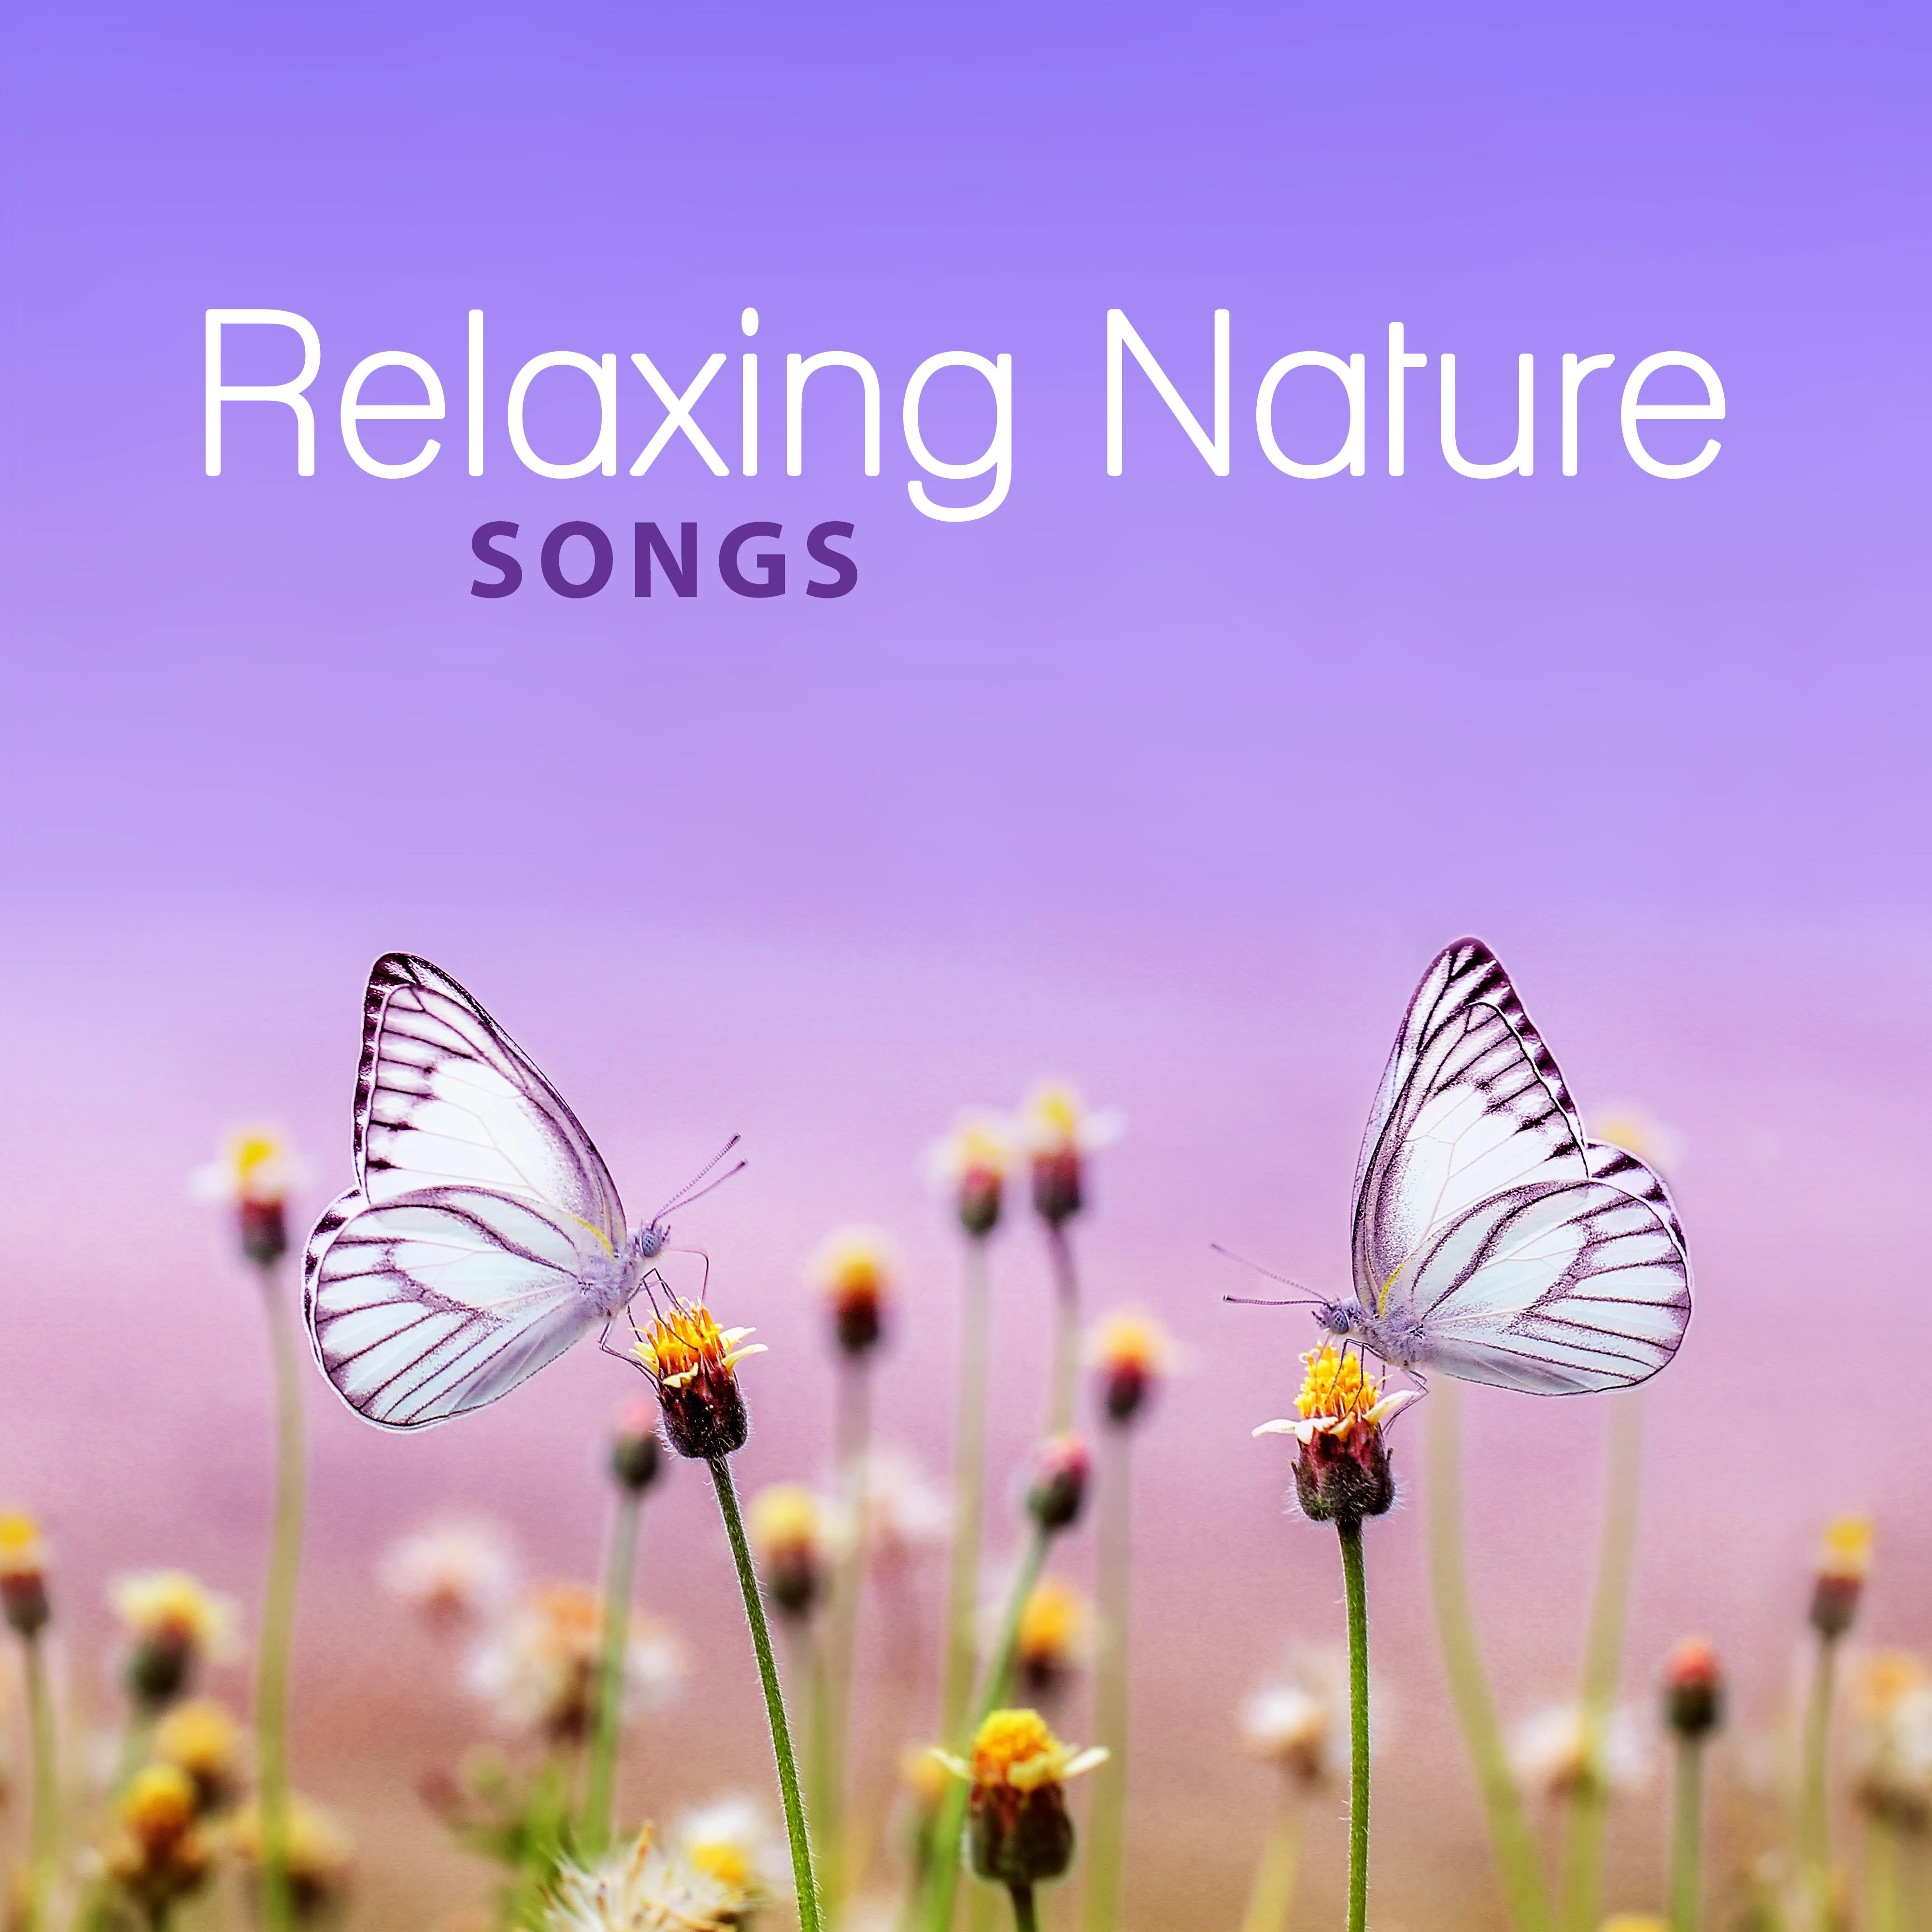 Relaxing Nature Songs – Soothing New Age Music for Relaxation, Relaxing Music, Relieve Stress, Calm Down